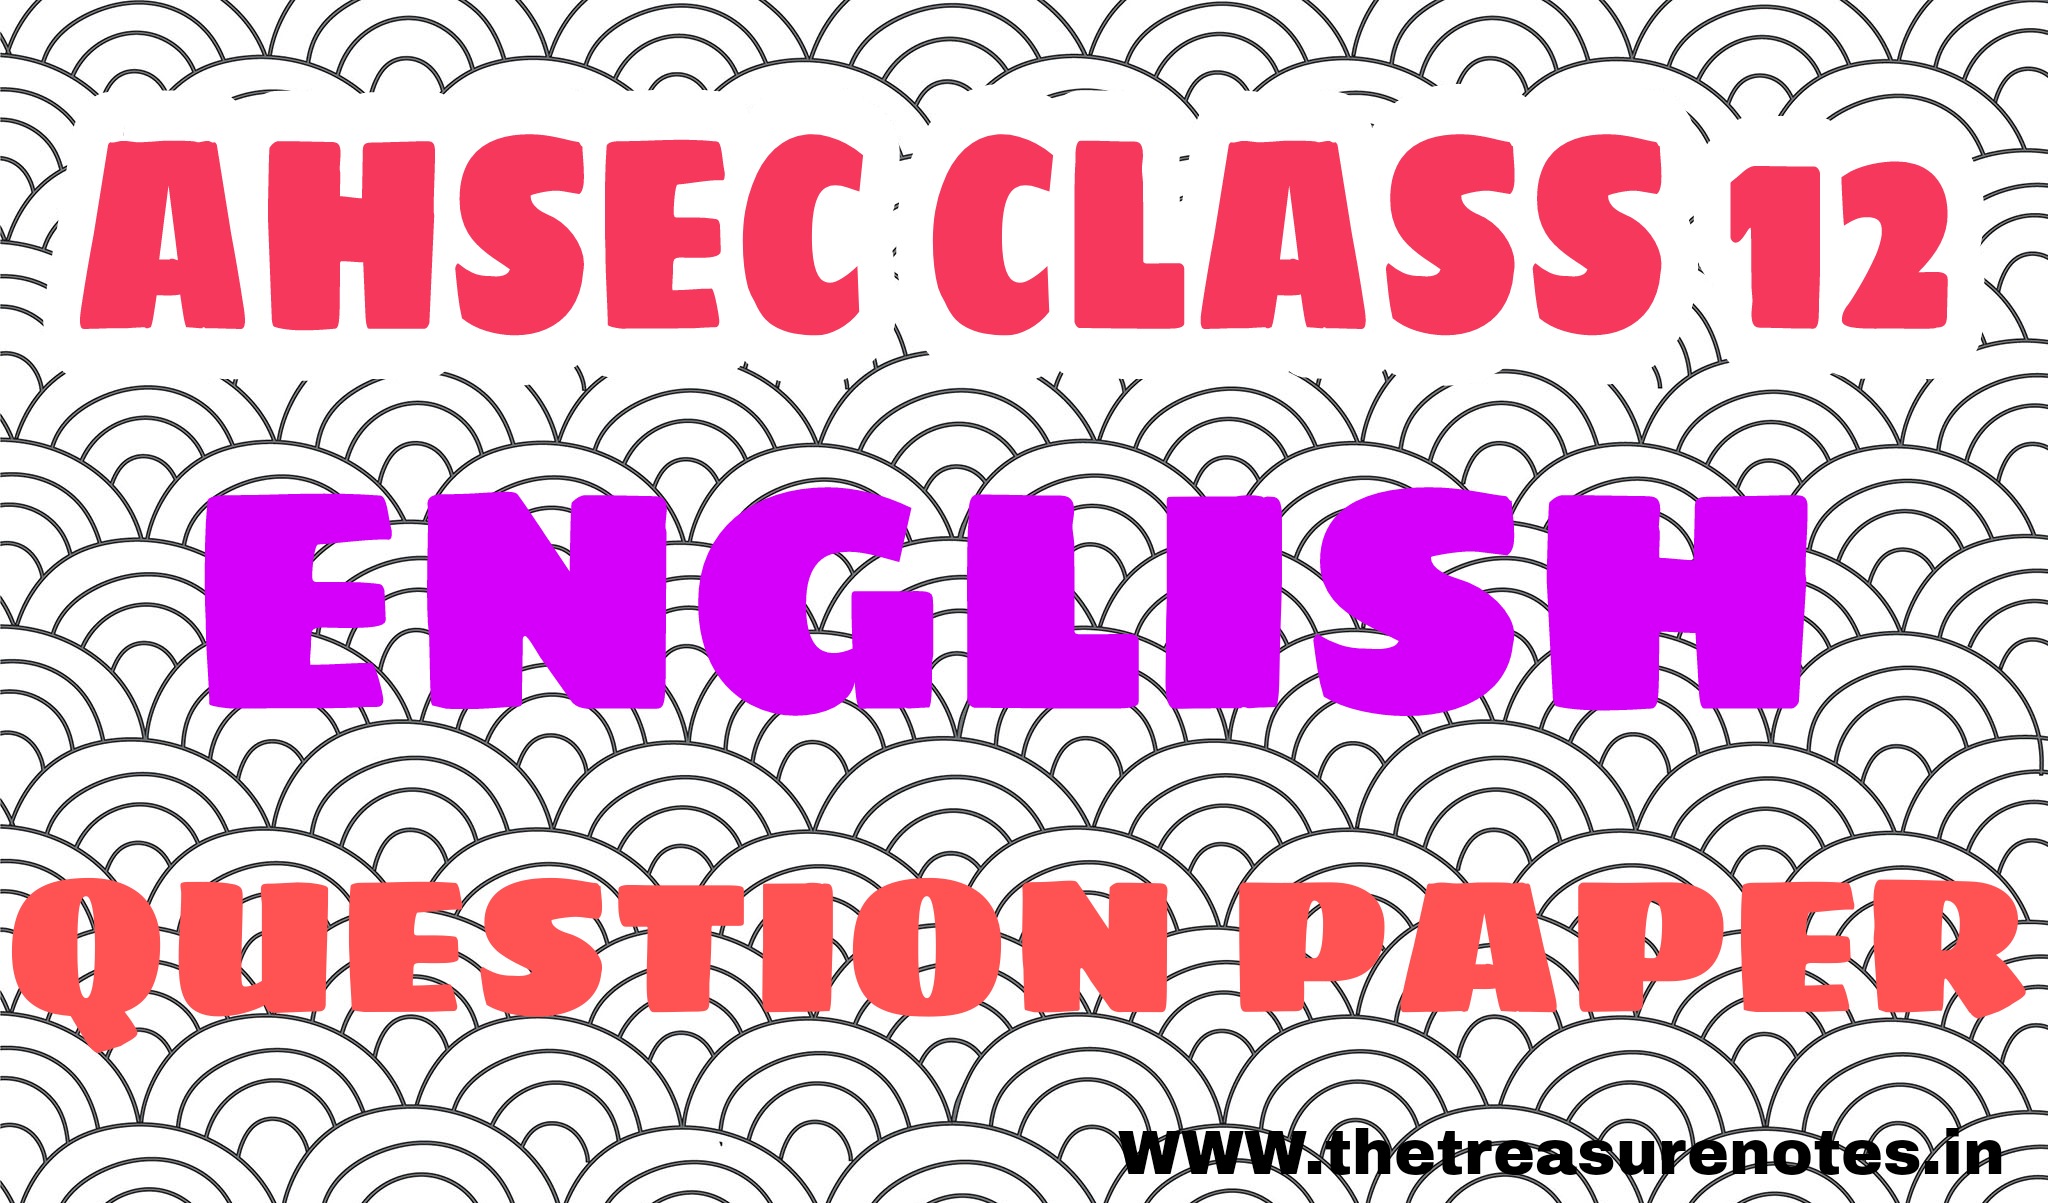 AHSEC Class 12 English Question paper'2012 | HS 2nd Year English Question paper '2012, Download Assam Class 12 English Question paper 2012,Hs 2nd year English Question paper